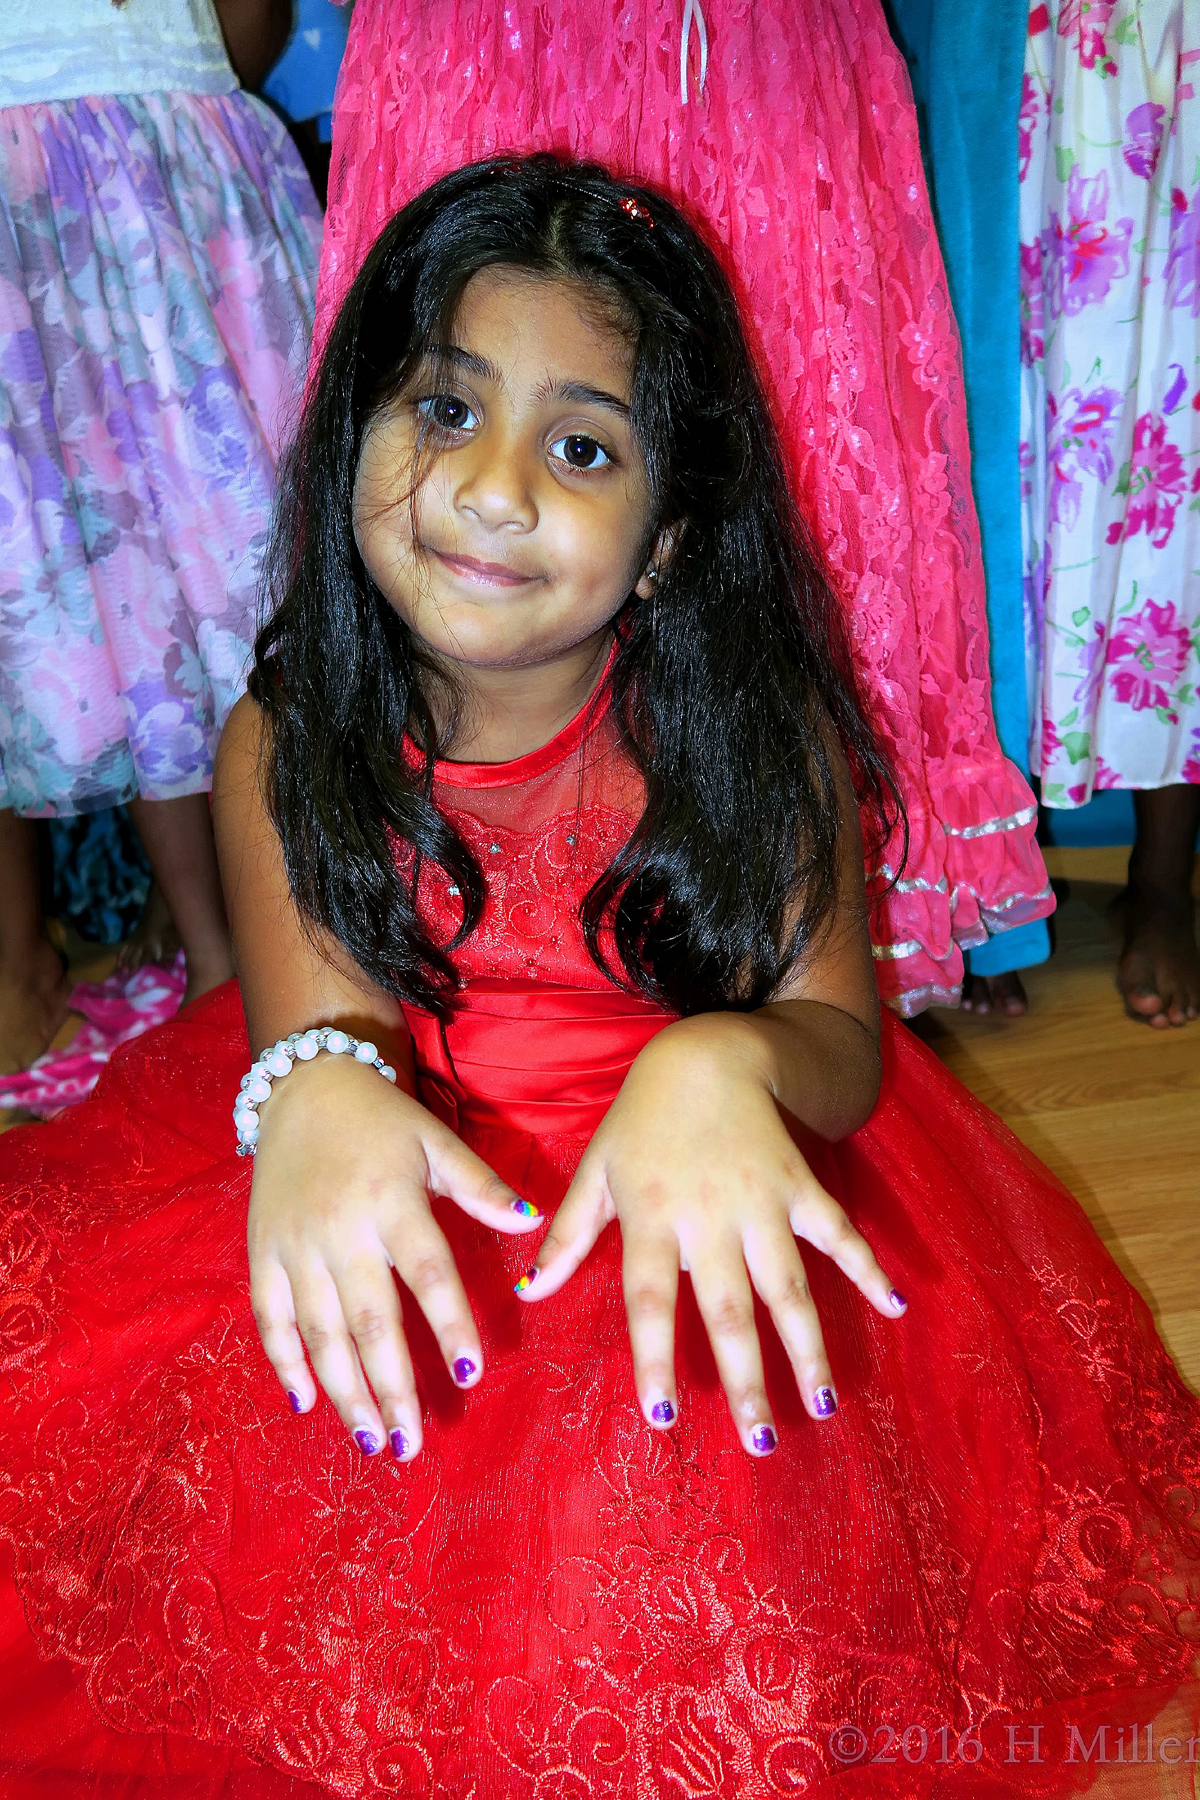 She Is Smiling With Her Home Kids Spa Party Mini Mani! 